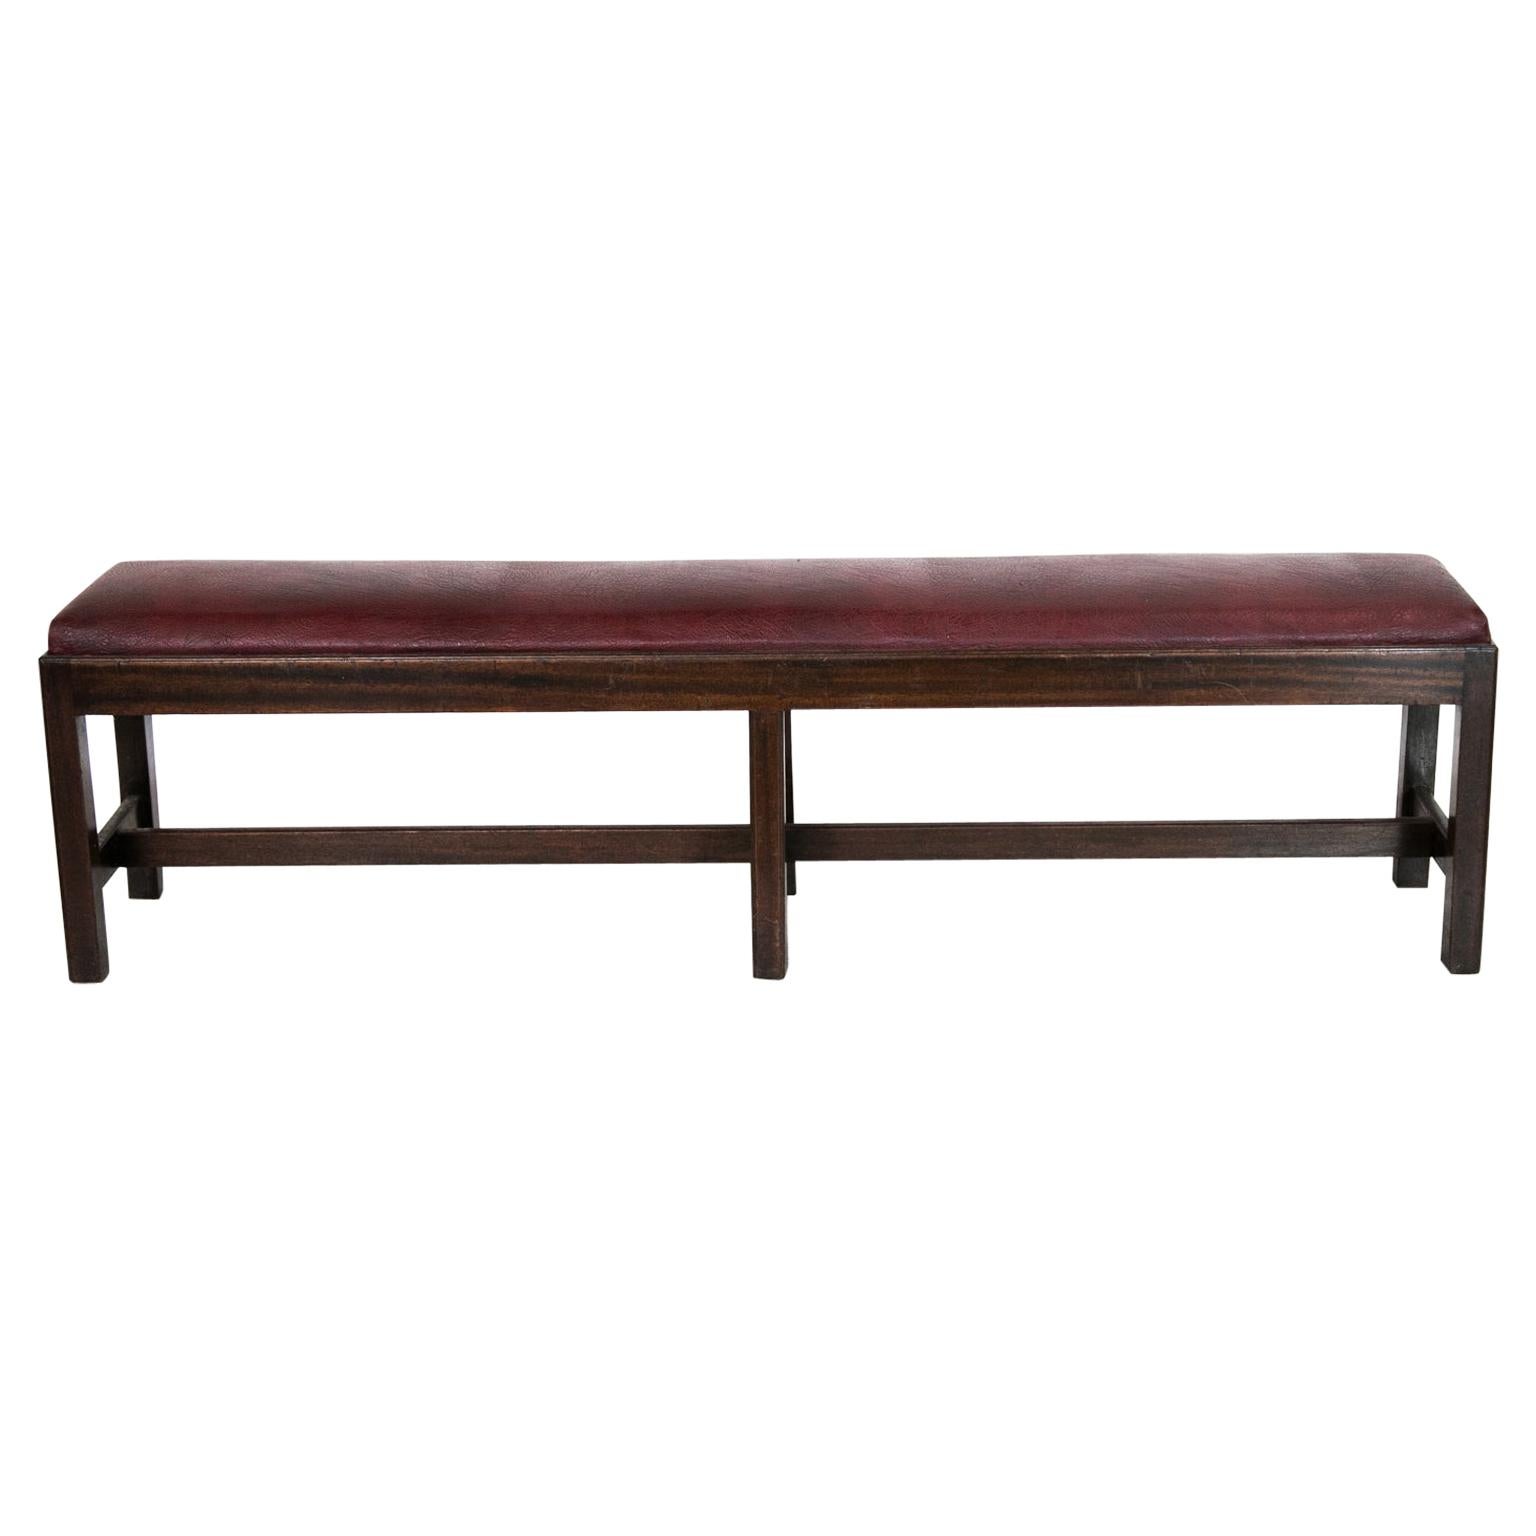 English Chippendale Style Long Bench